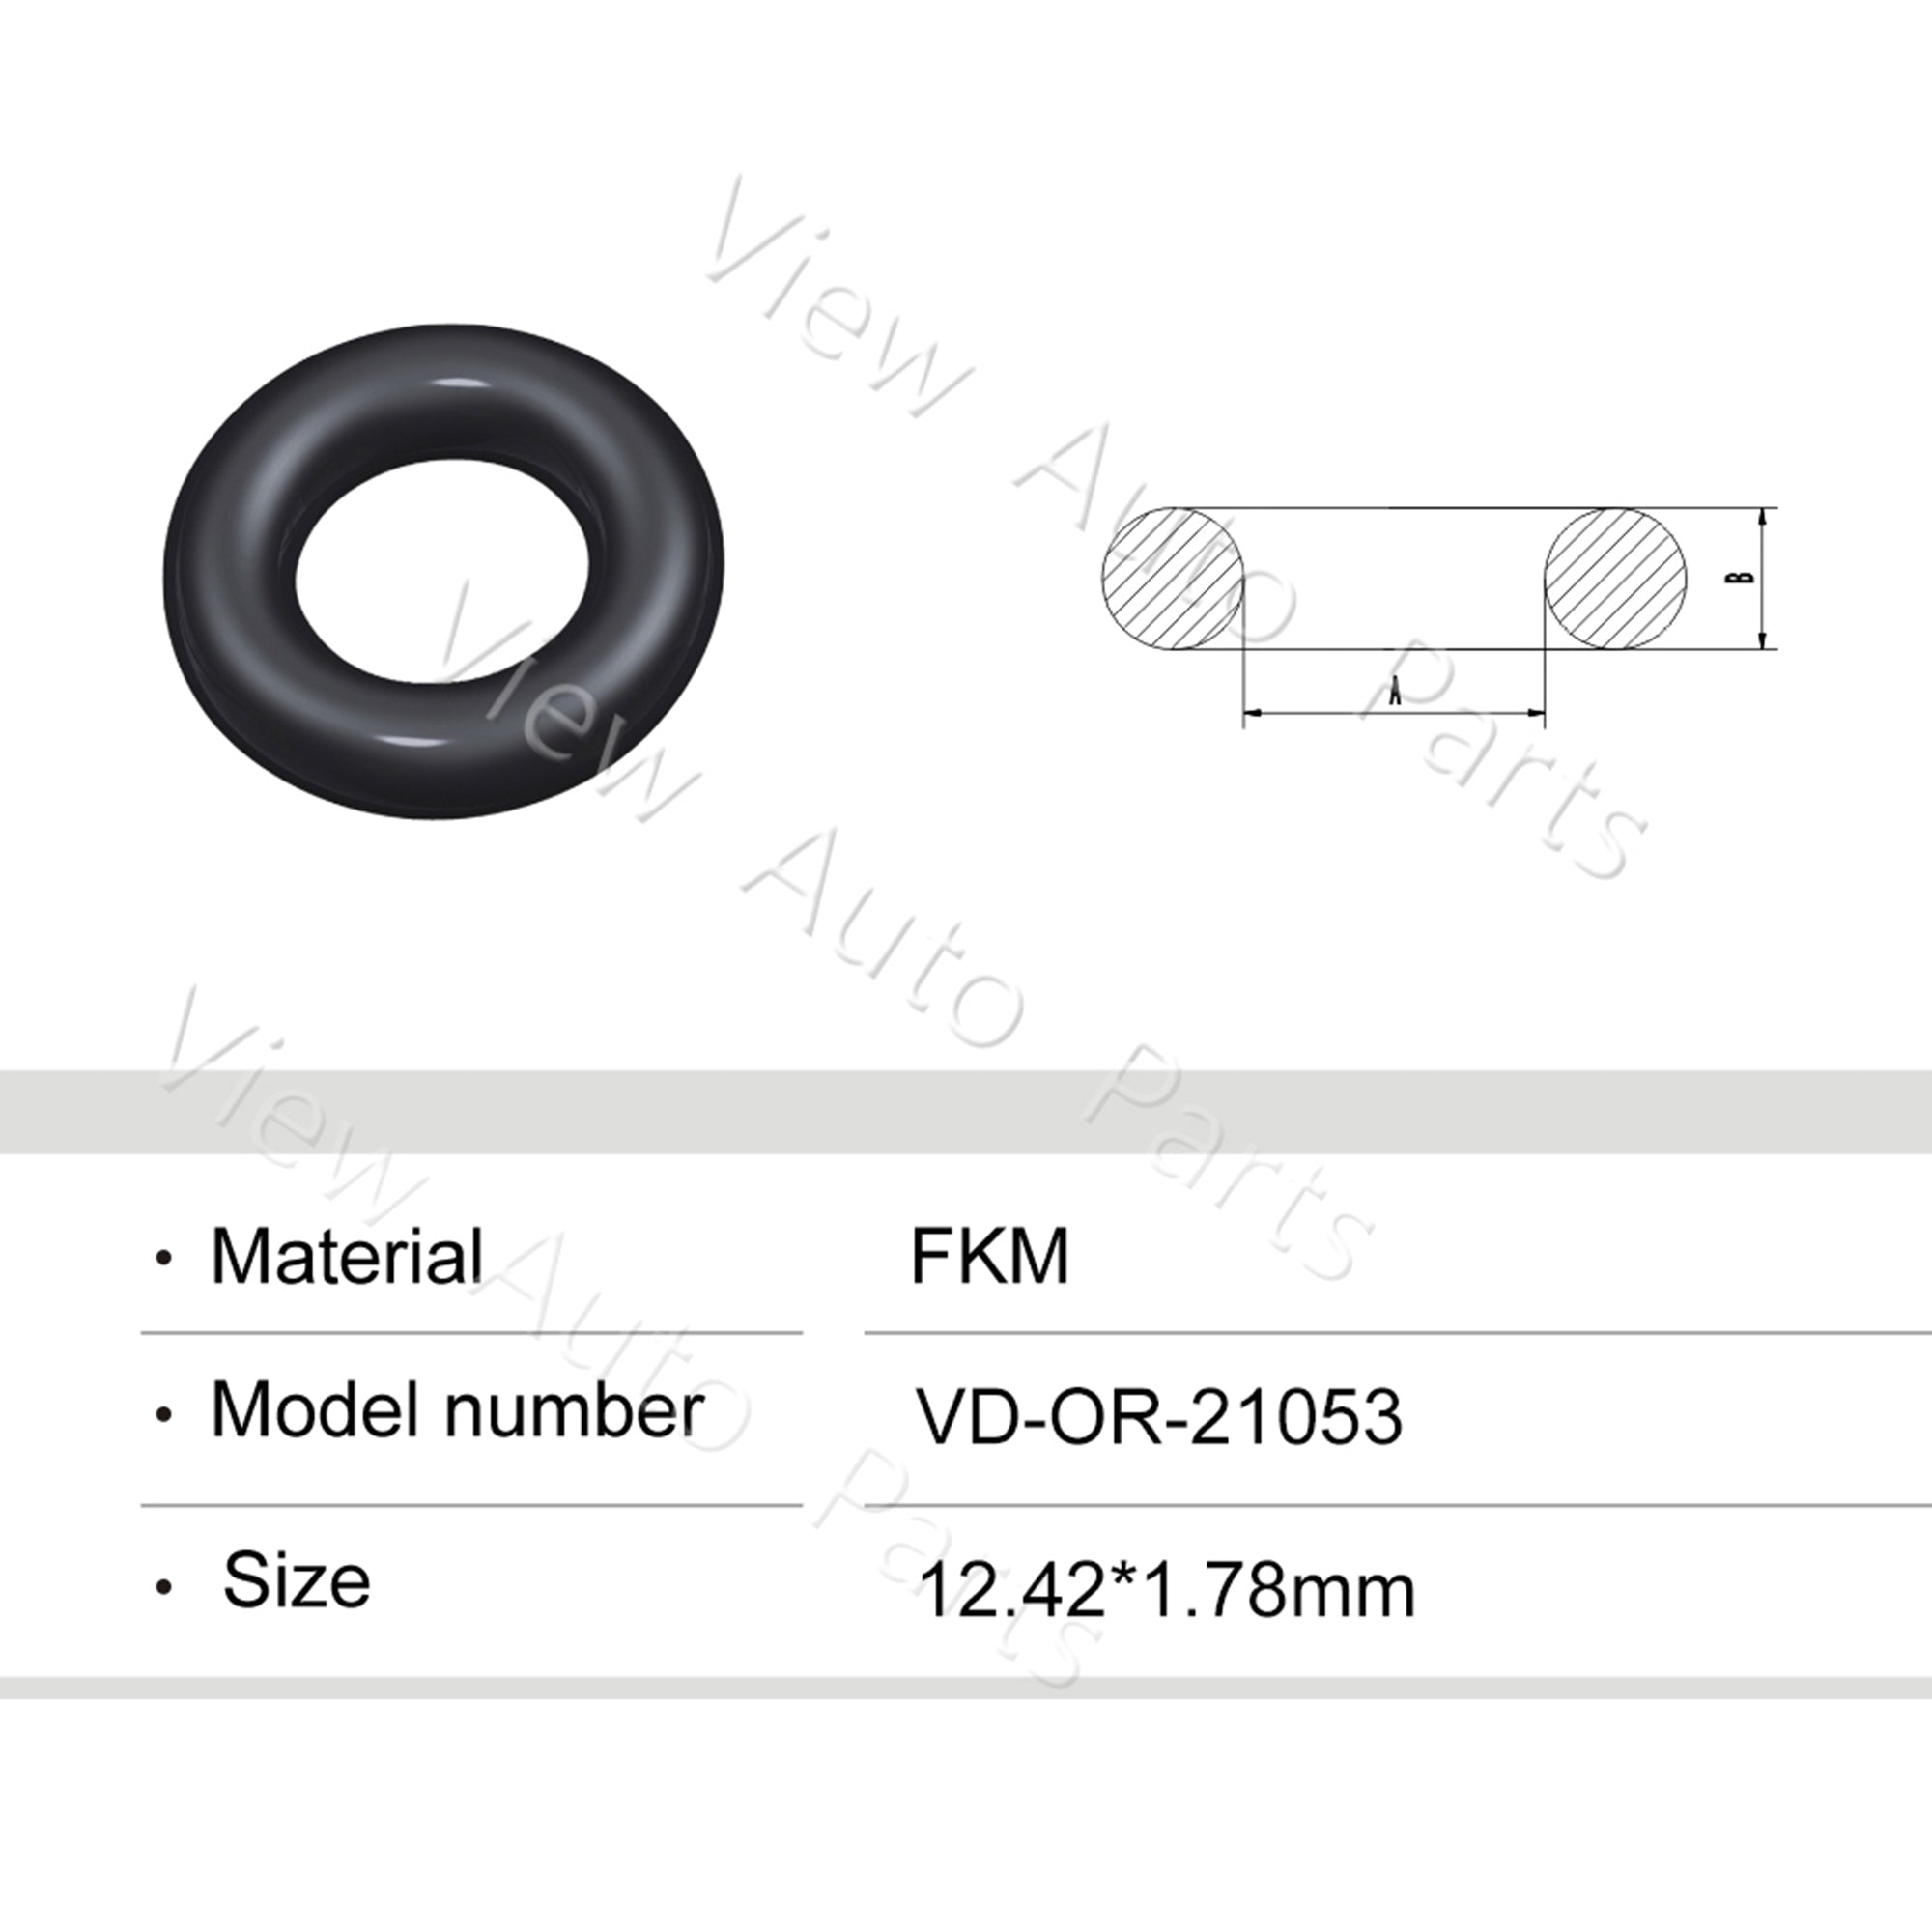 Fuel Injector Rubber Seal Orings for GMC 2.5L Fuel Injector Repair Kits FKM & Rubber Heat Resistant, Size: 12.42*1.78mm OR-21053